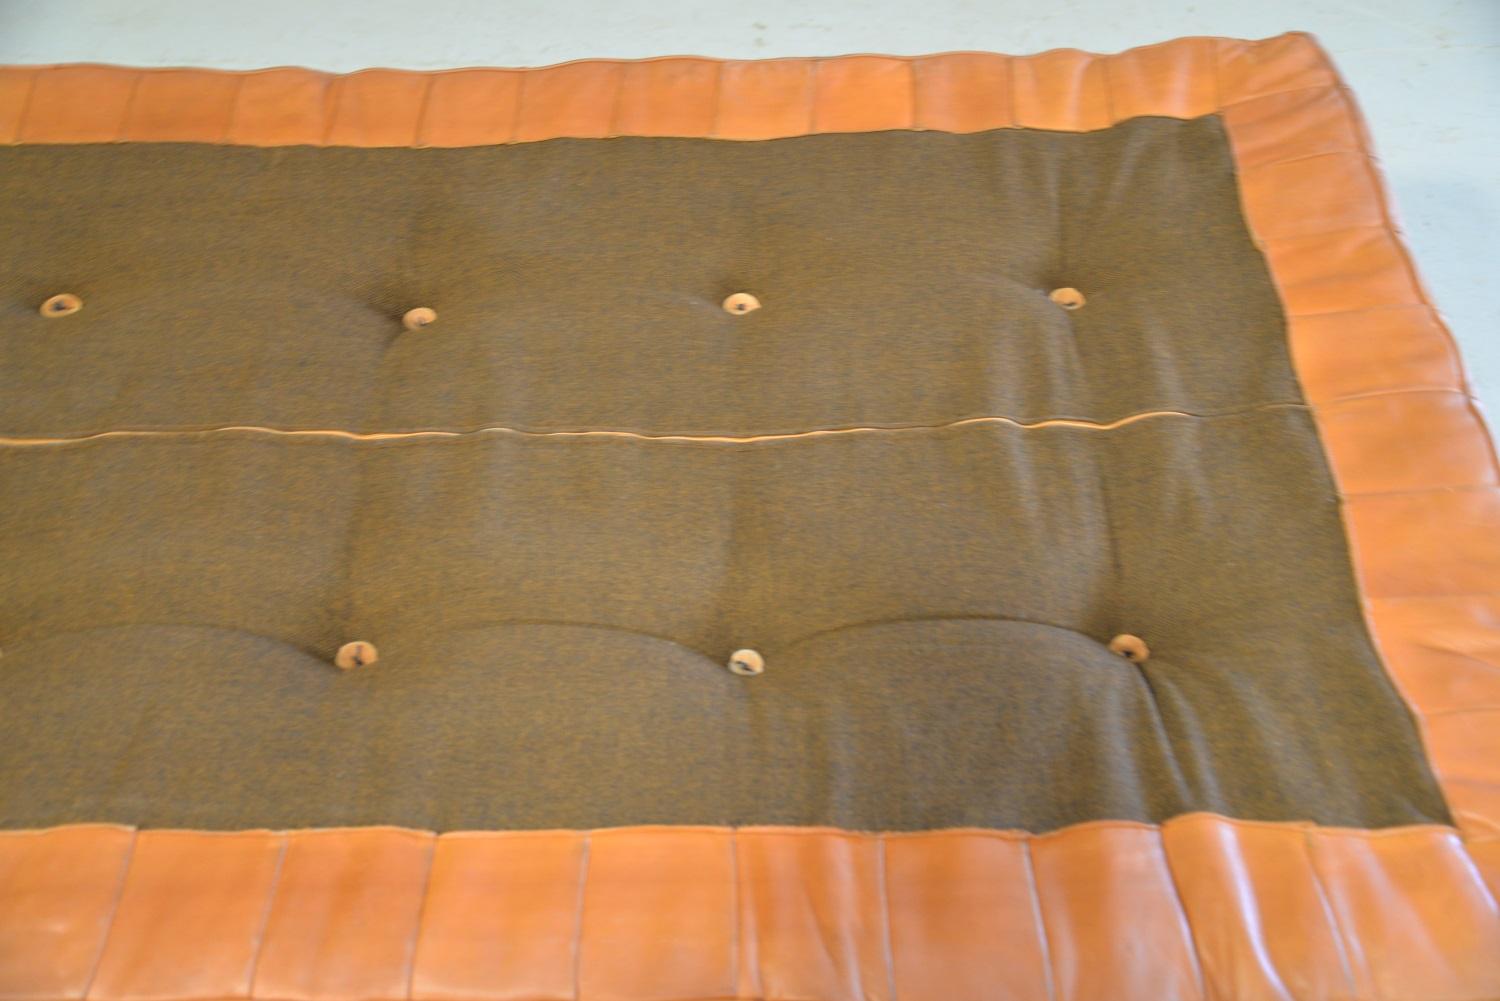 Vintage De Sede DS 80 Patchwork Leather Daybed, Switzerland, 1960s For Sale 6